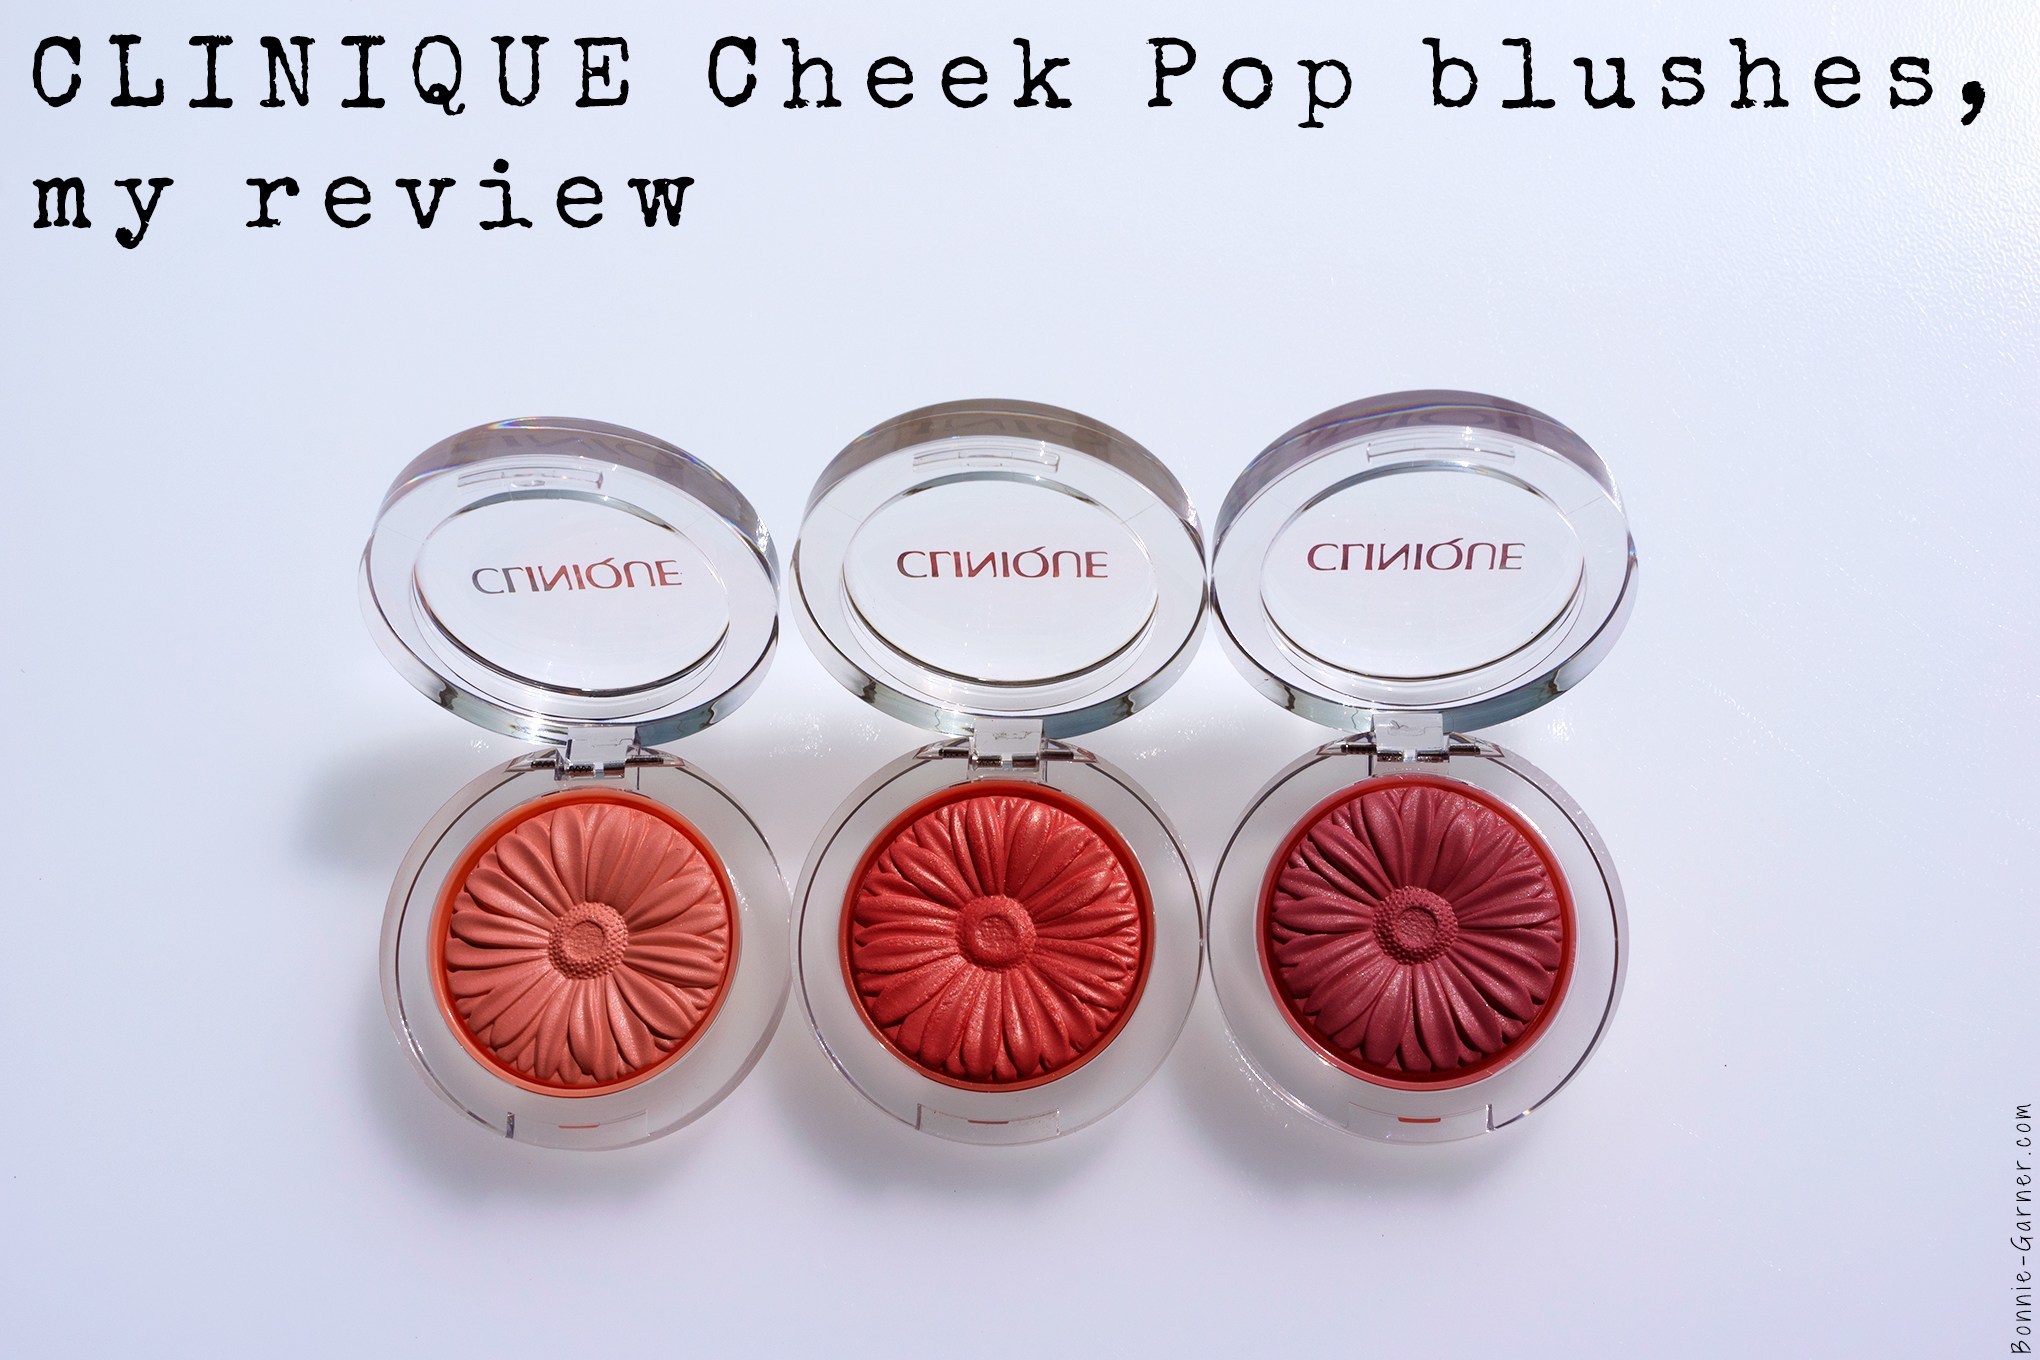 Clinique Cheek Pop blushes, my review